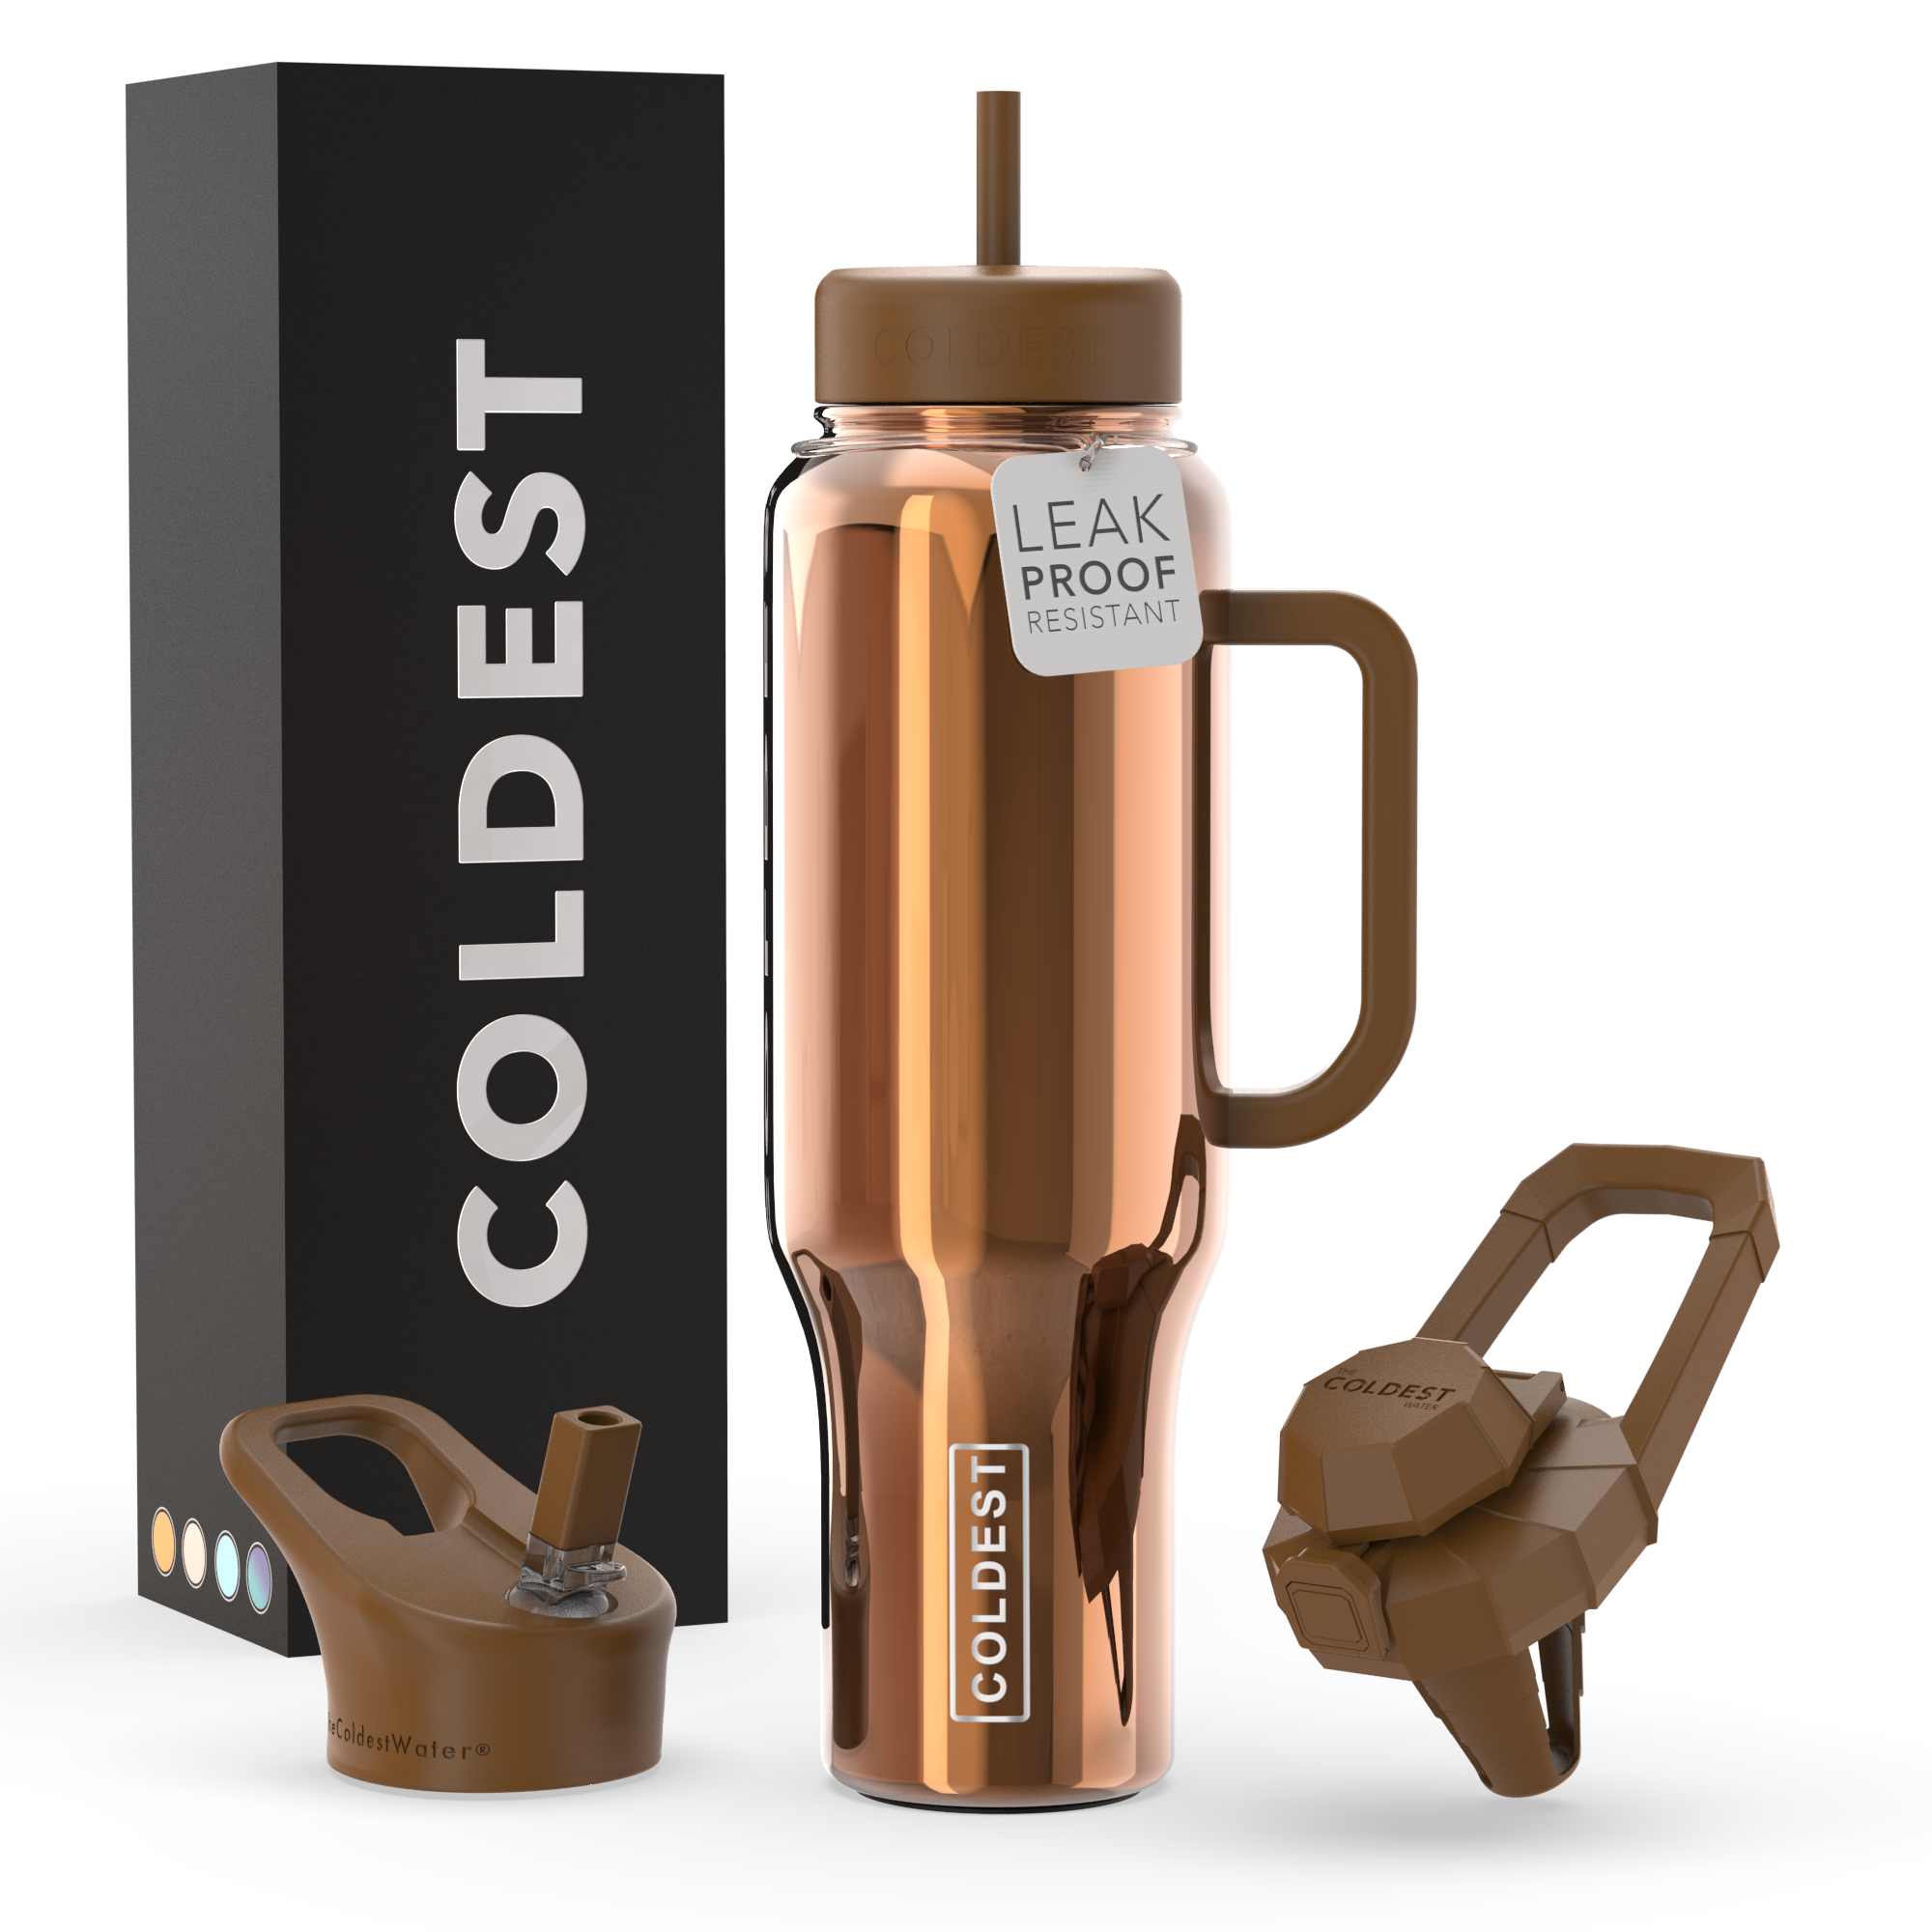 Limited Edition: Gold 22oz. Stainless Steel Bottle & Lid Cirkul is